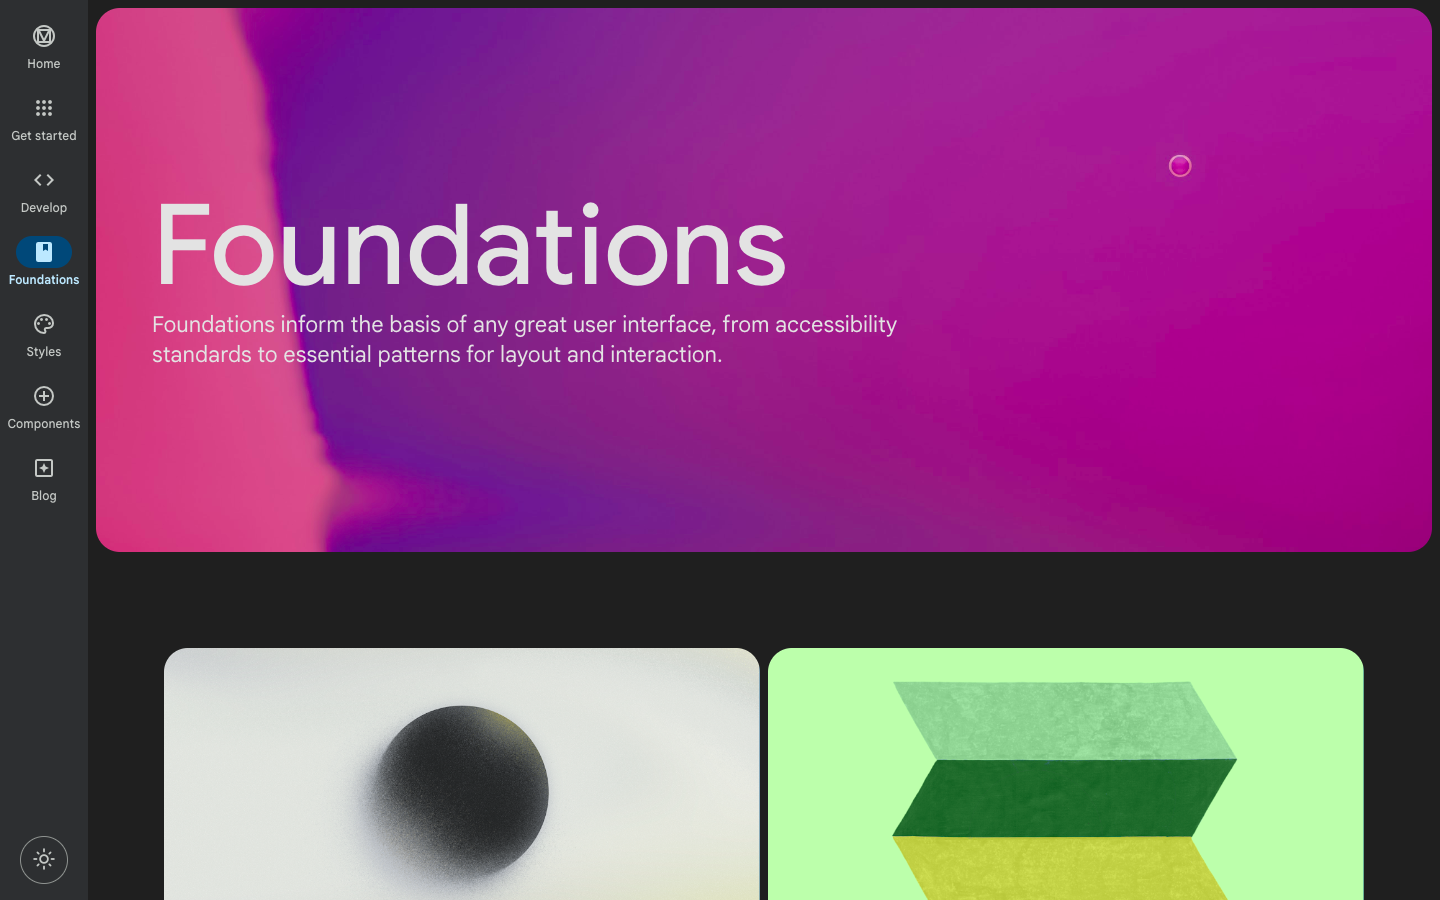 Foundations page from the m3.material.ion website